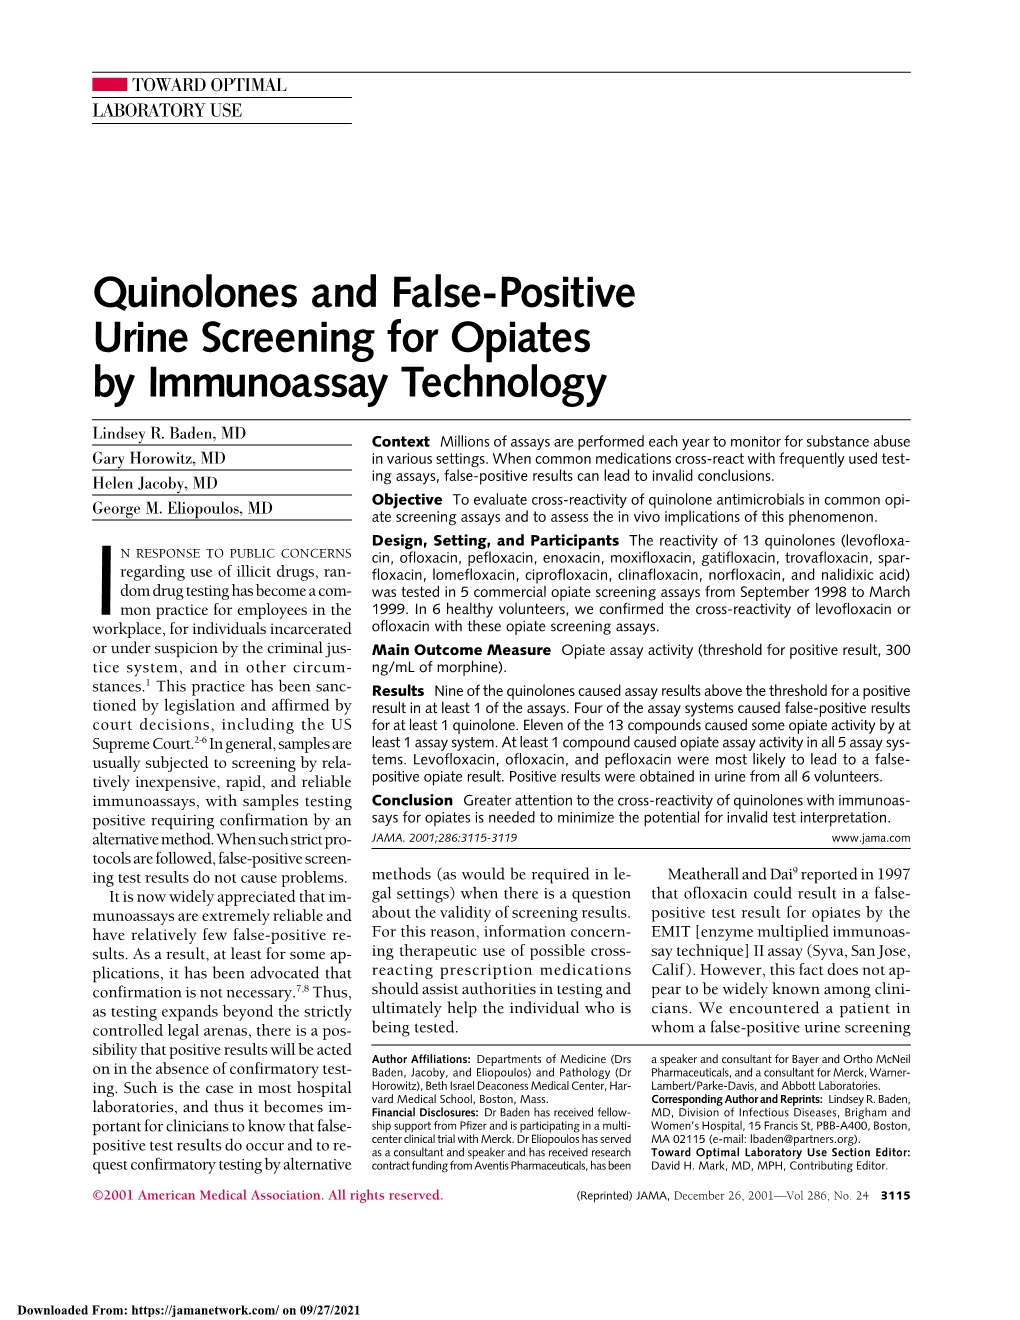 Quinolones and False-Positive Urine Screening for Opiates by Immunoassay Technology